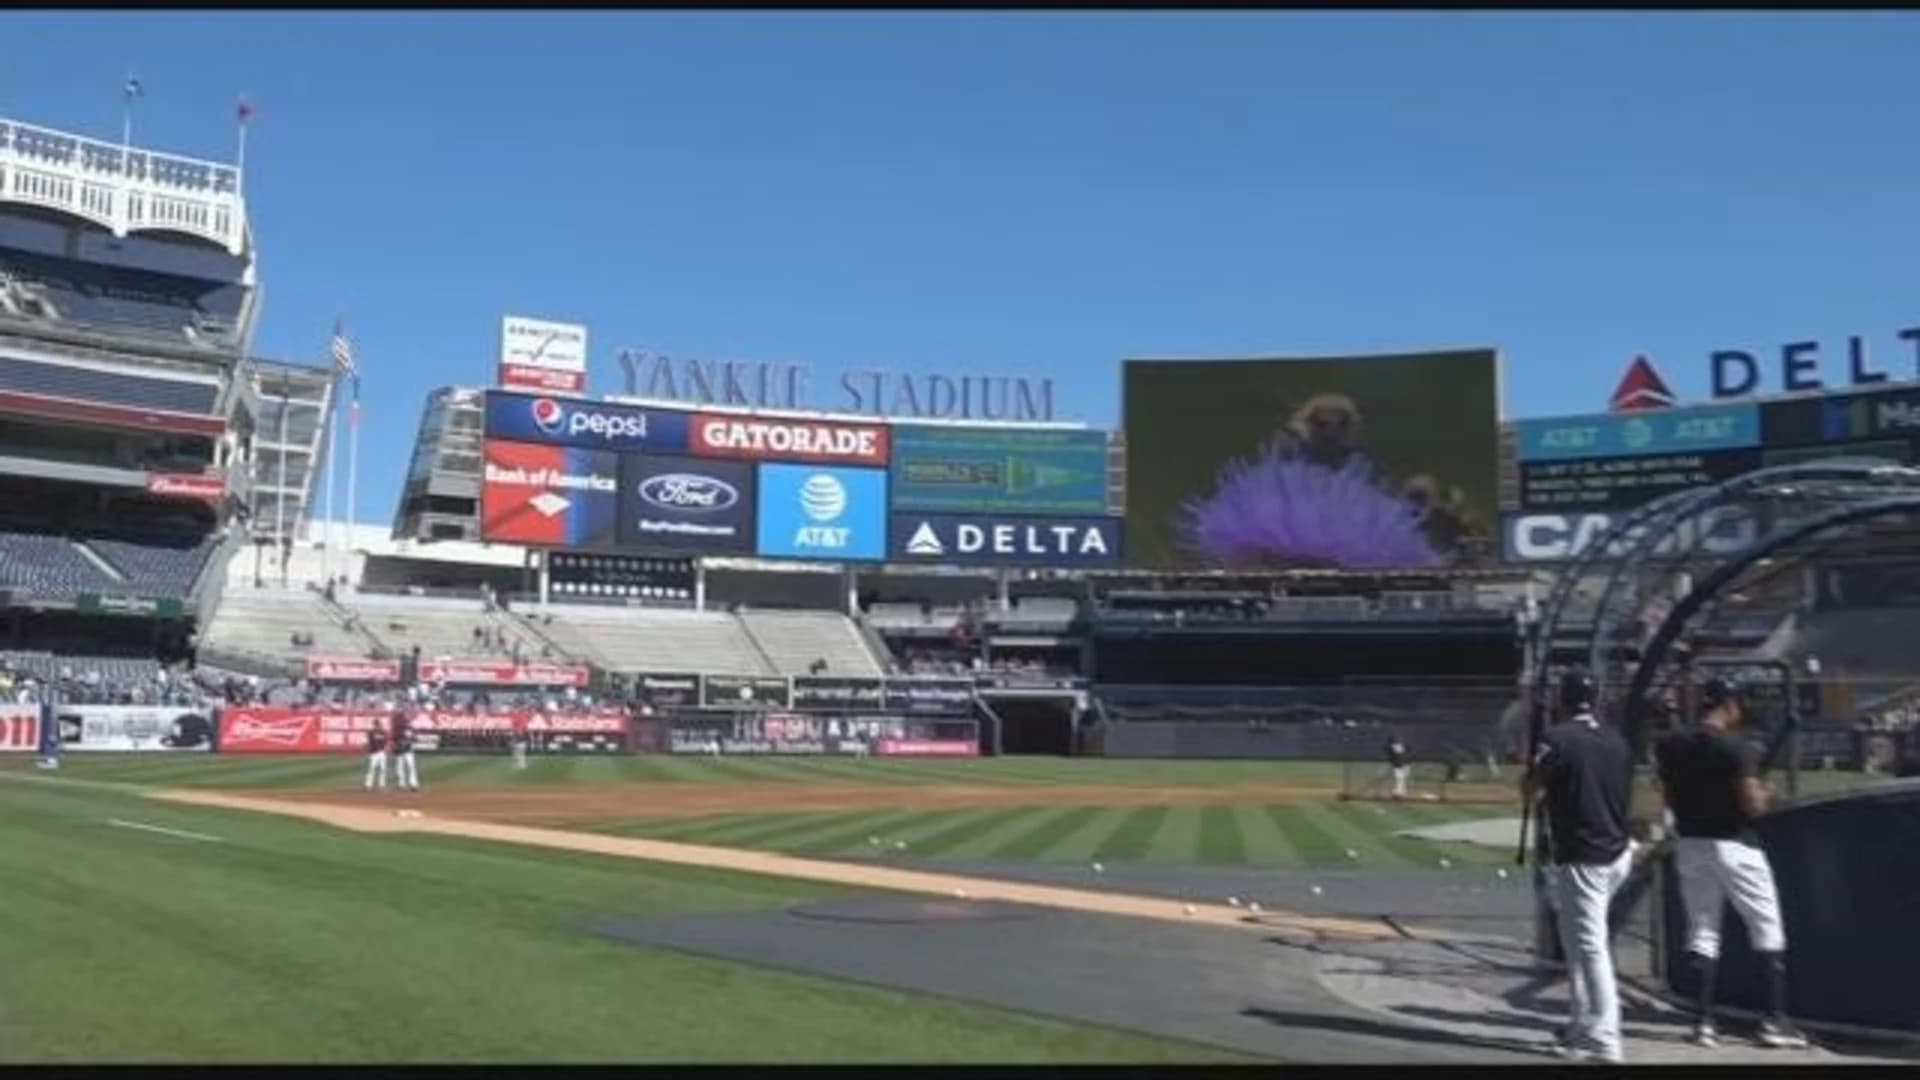 96-year-old Yankees fan attends home game, gets tour